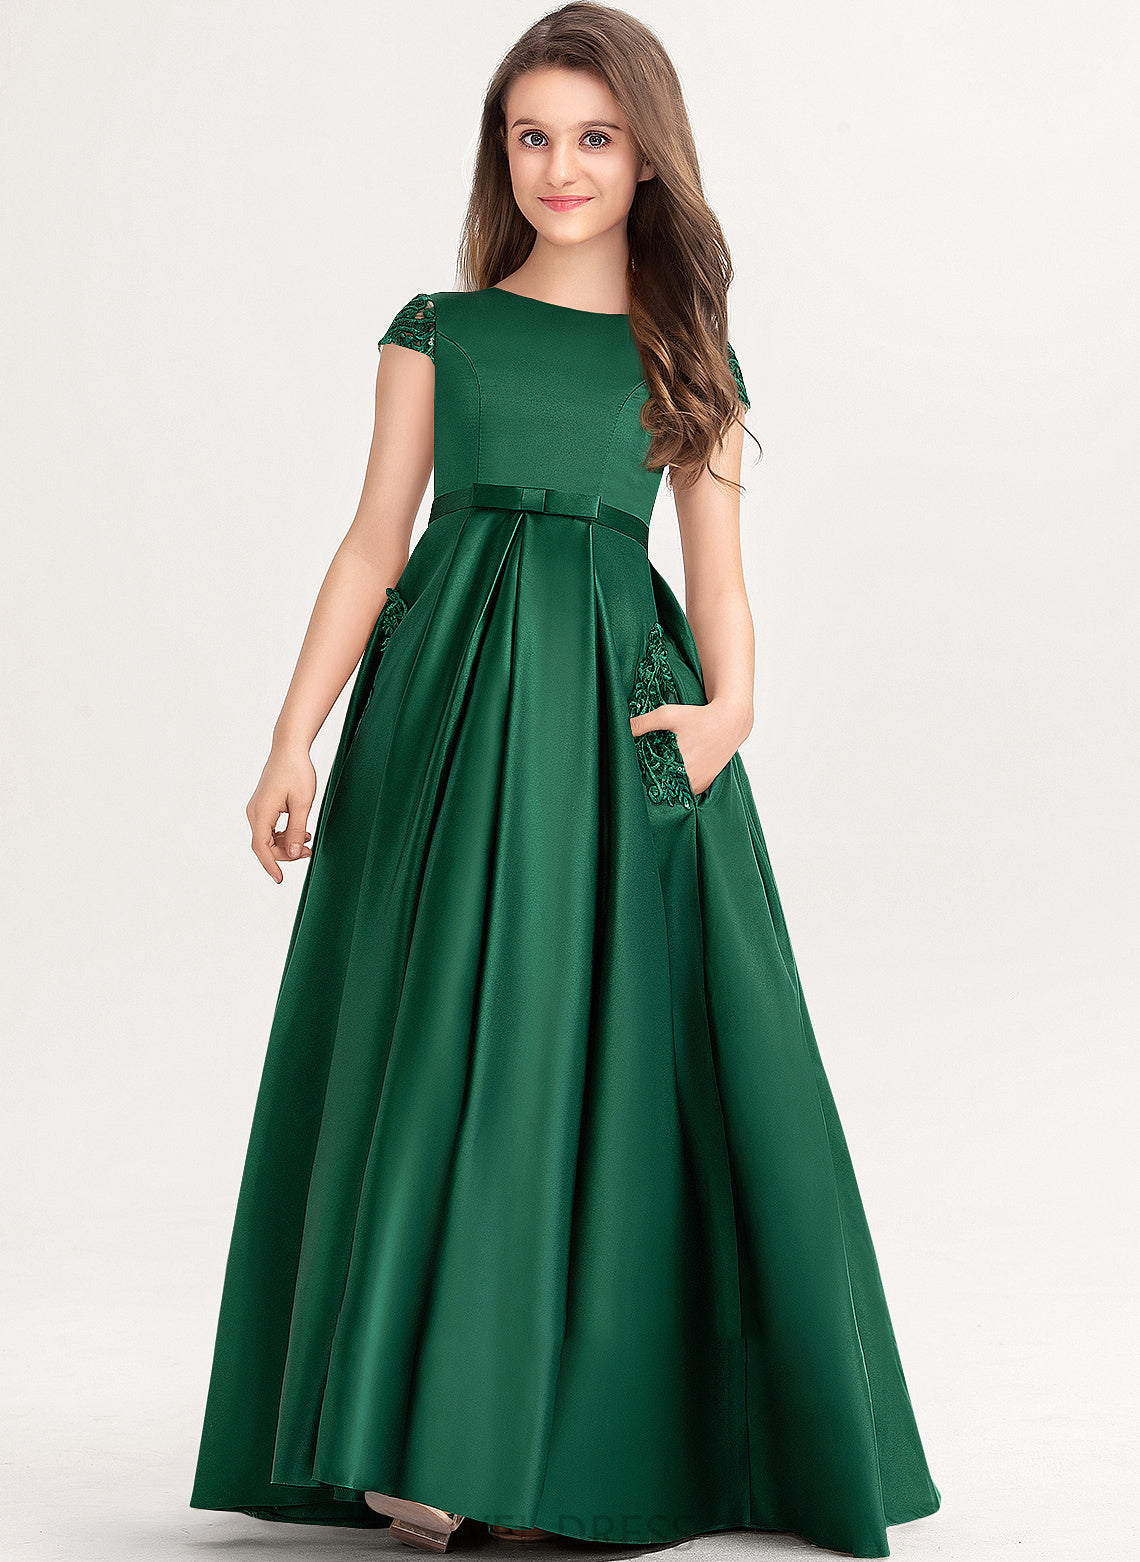 Scoop Ball-Gown/Princess Junior Bridesmaid Dresses Pockets Lace Satin Floor-Length With Neck Bow(s) Jamya